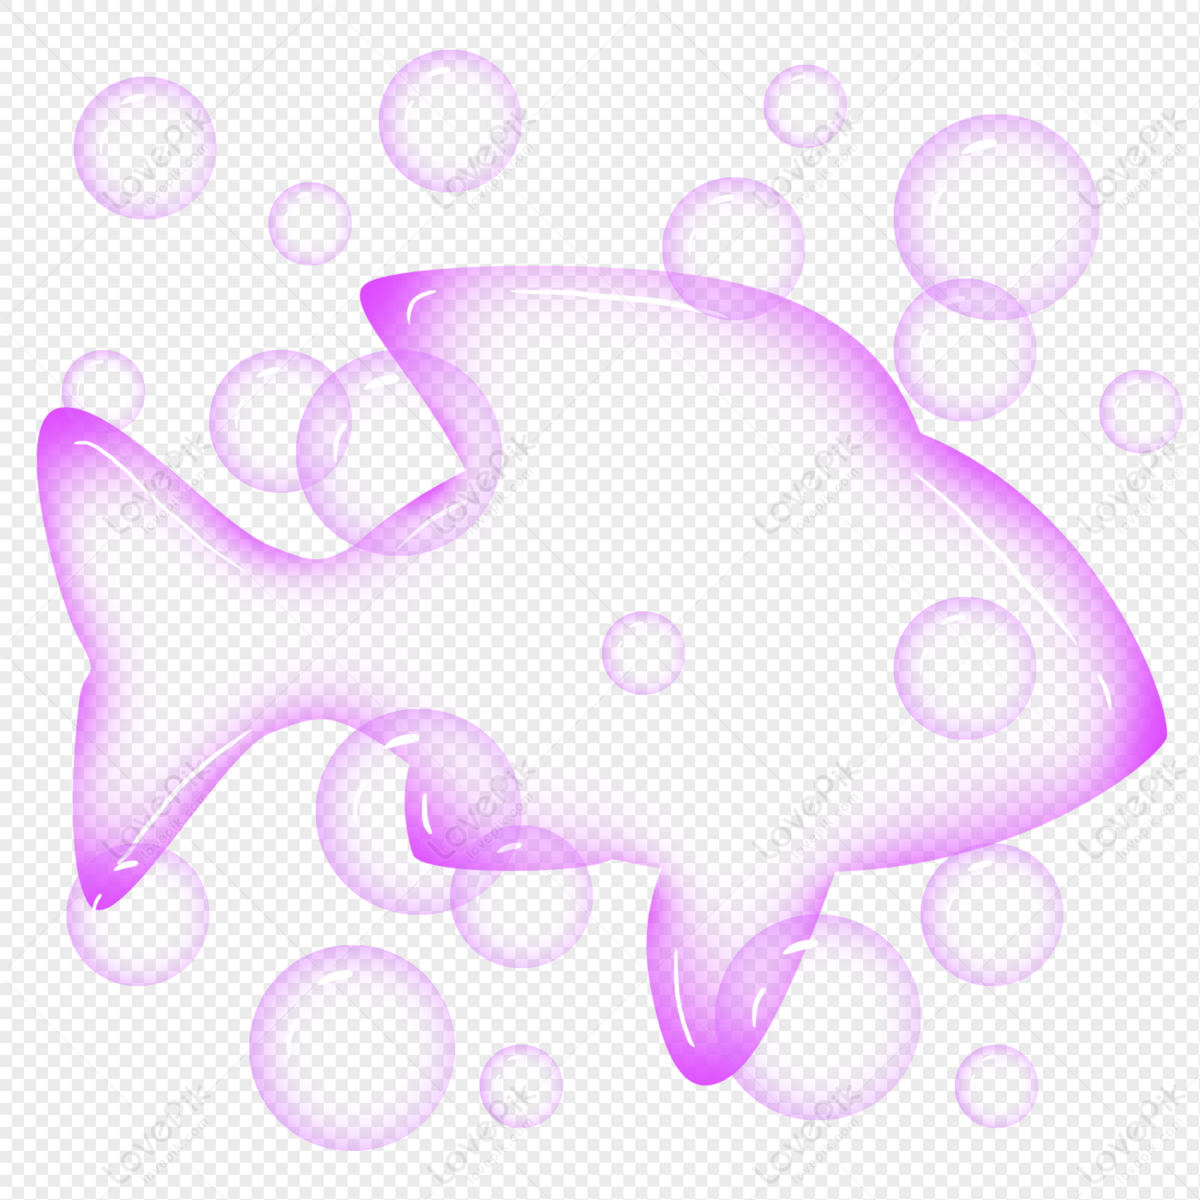 Commercial Flat Cartoon Fashion Purple Fish Transparent Bubble PNG  Transparent Image And Clipart Image For Free Download - Lovepik | 401355957